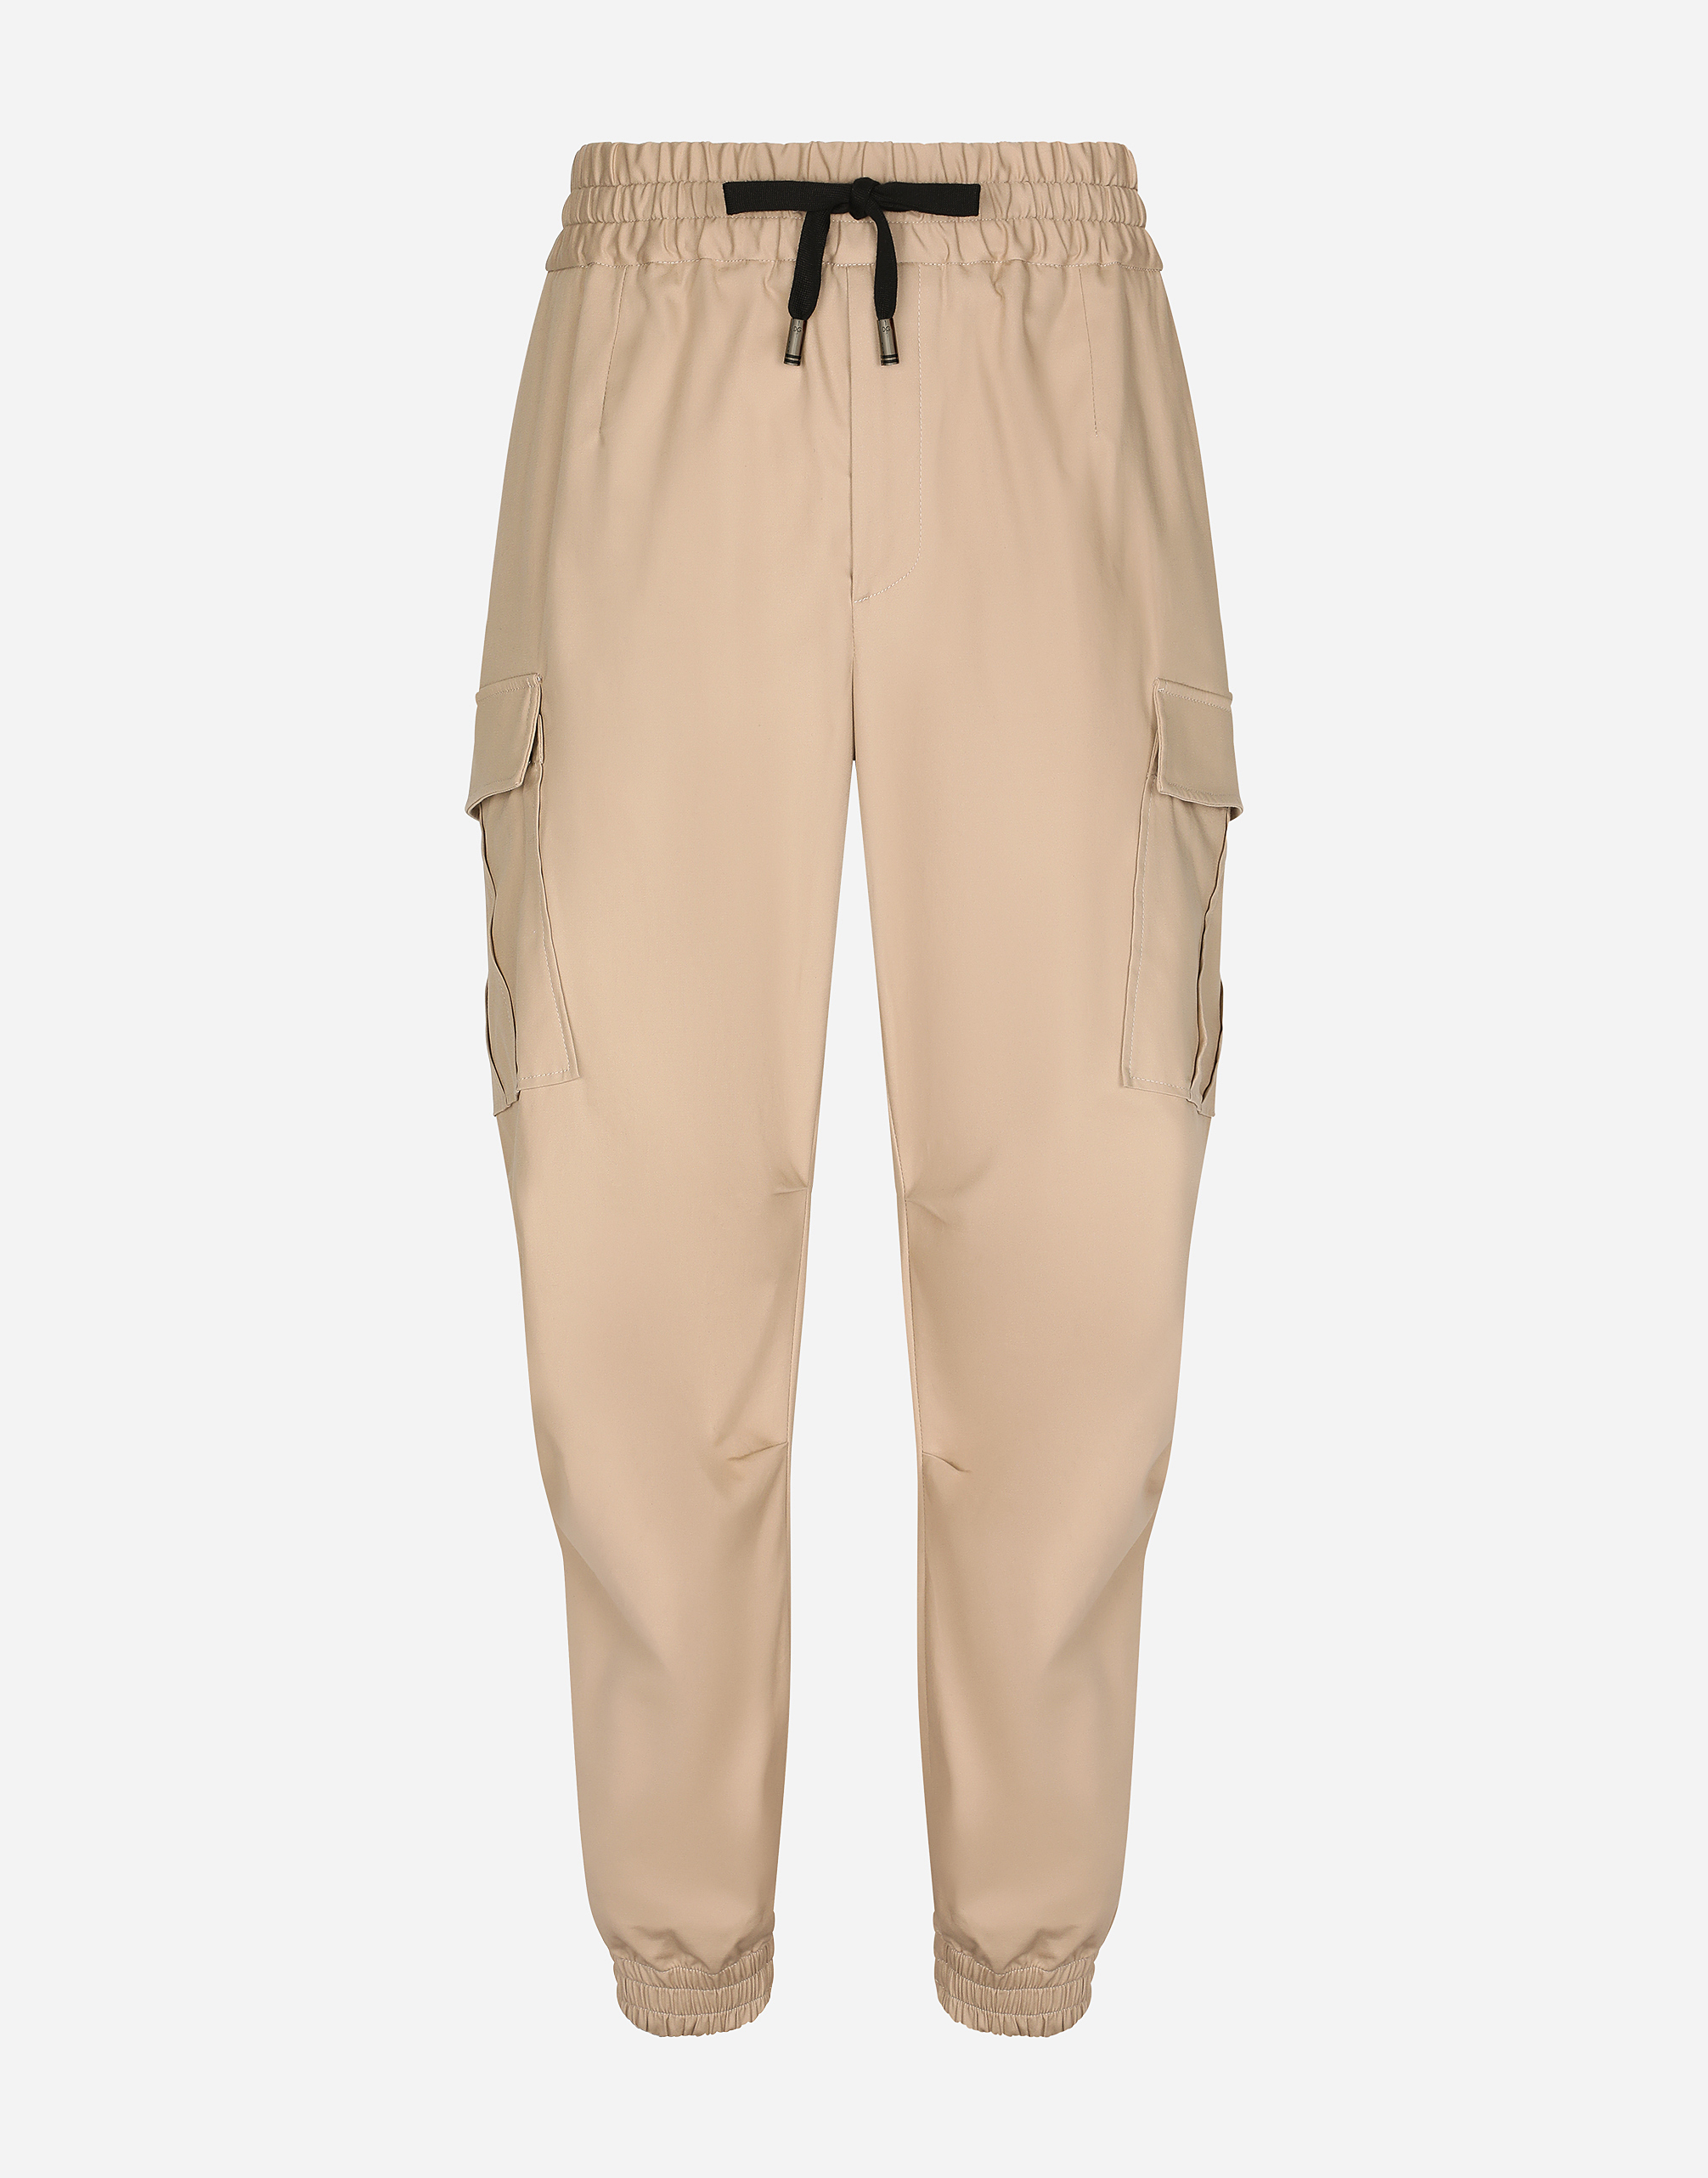 Cotton cargo pants with branded tag in Beige